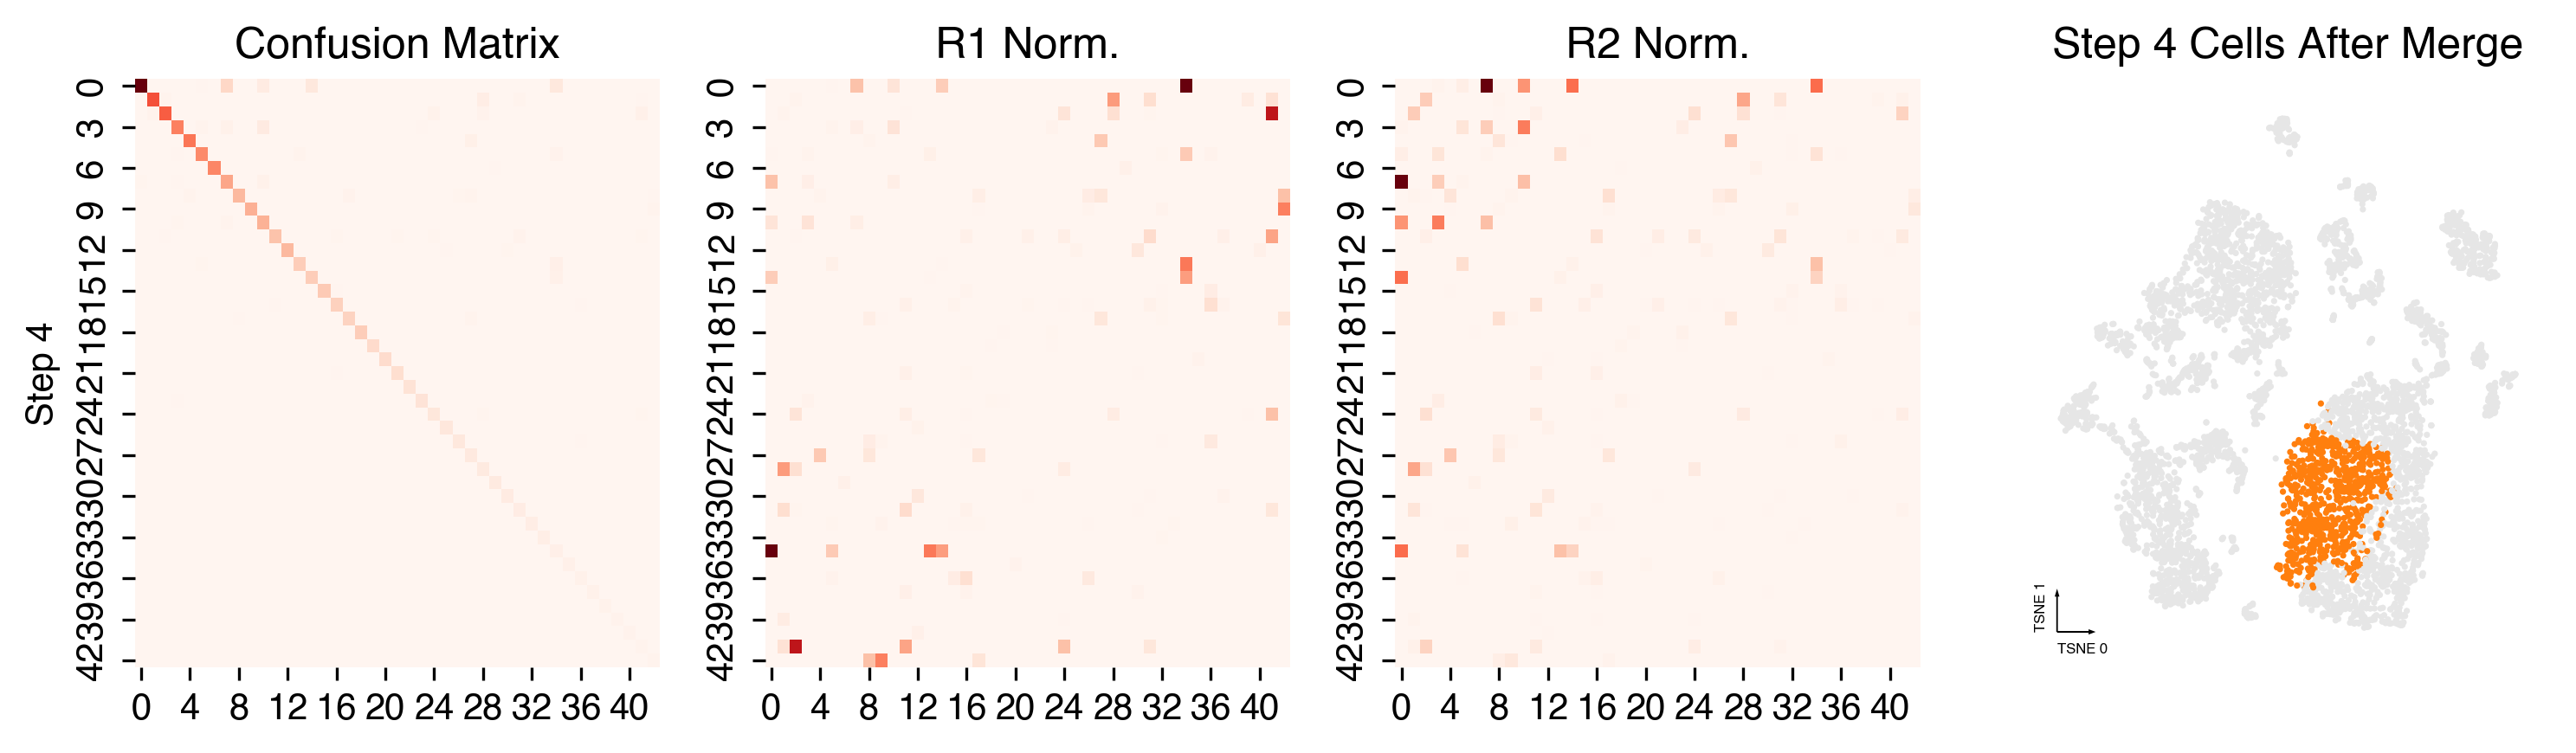 ../../../_images/06-Clustering_16_4.png